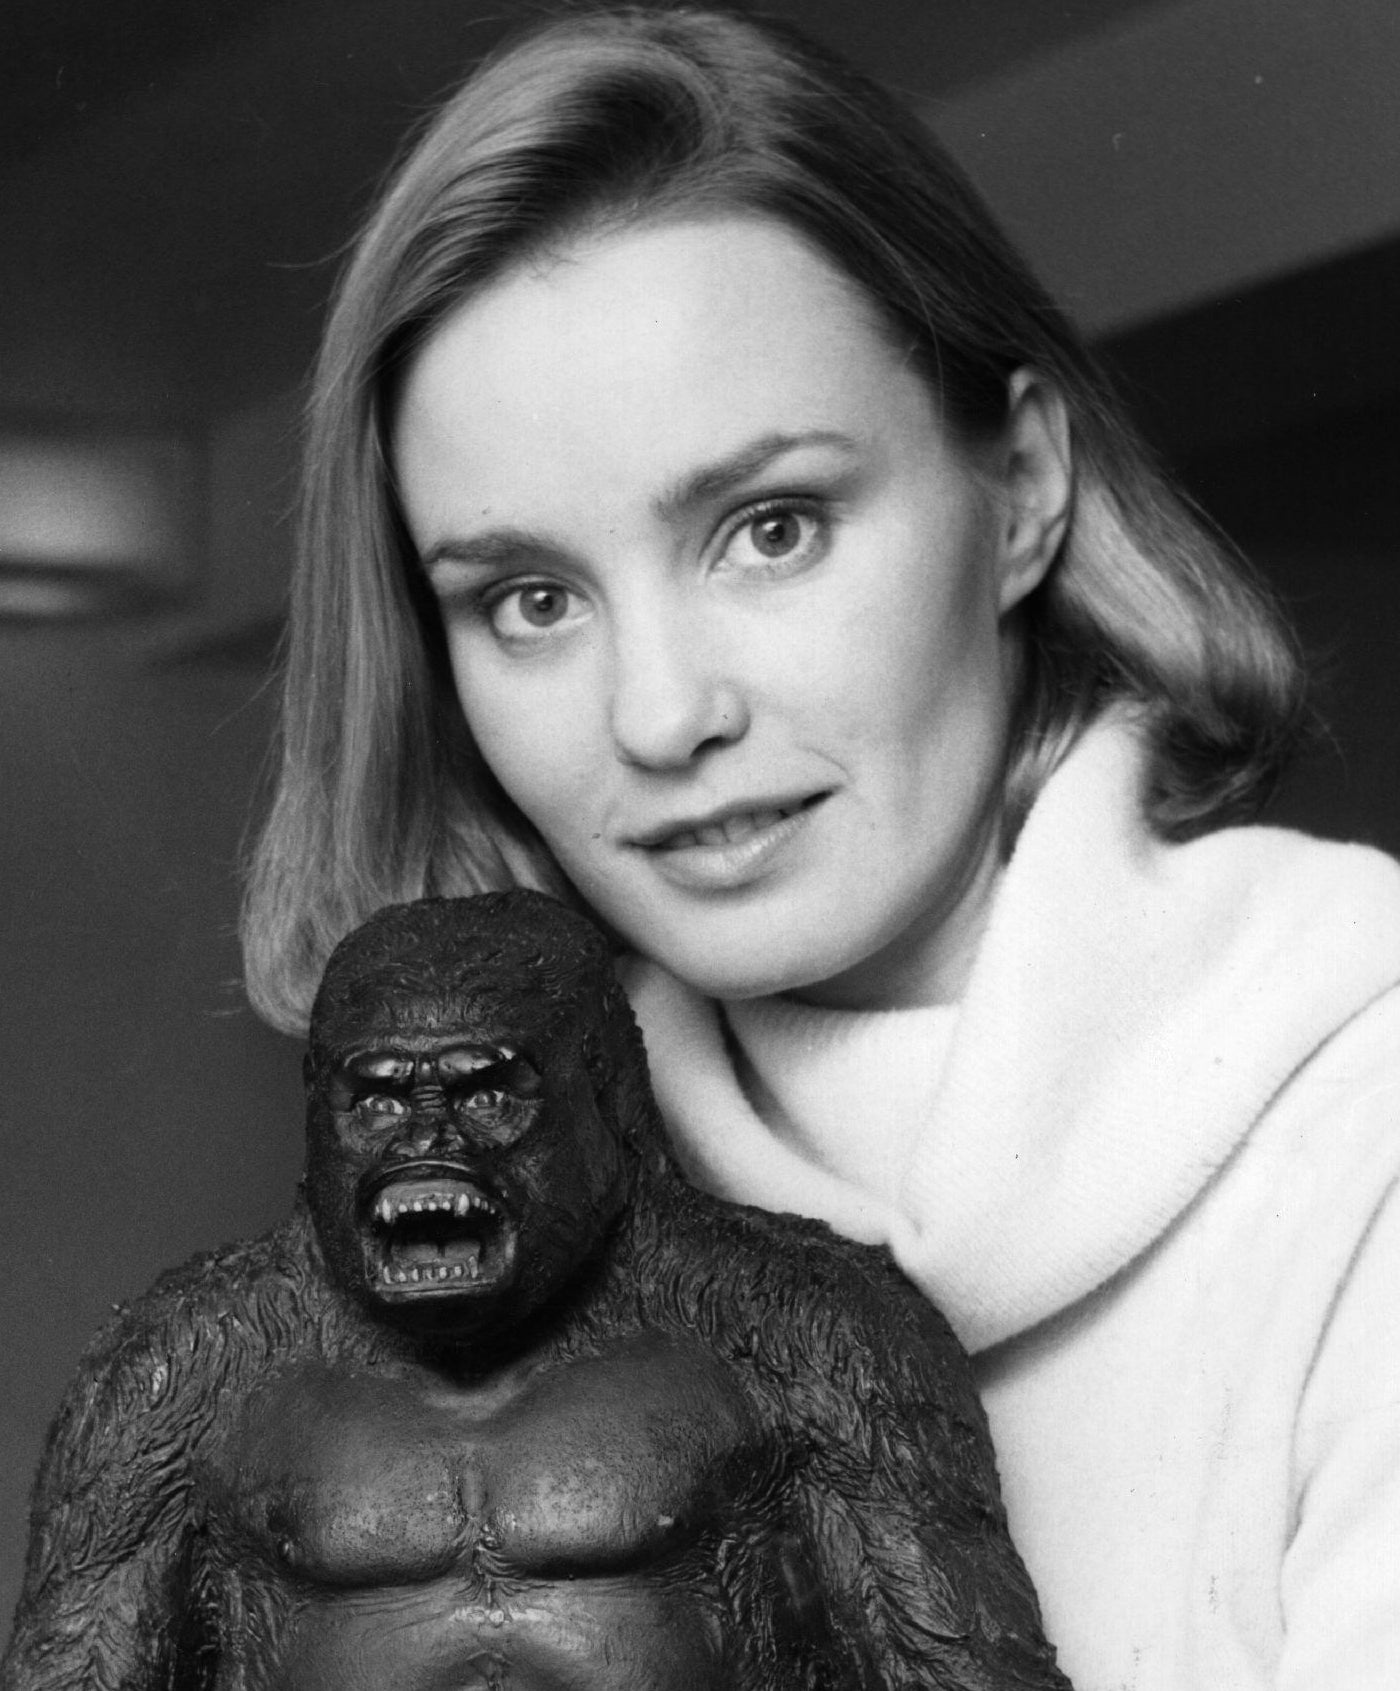 Young Jessica Lange